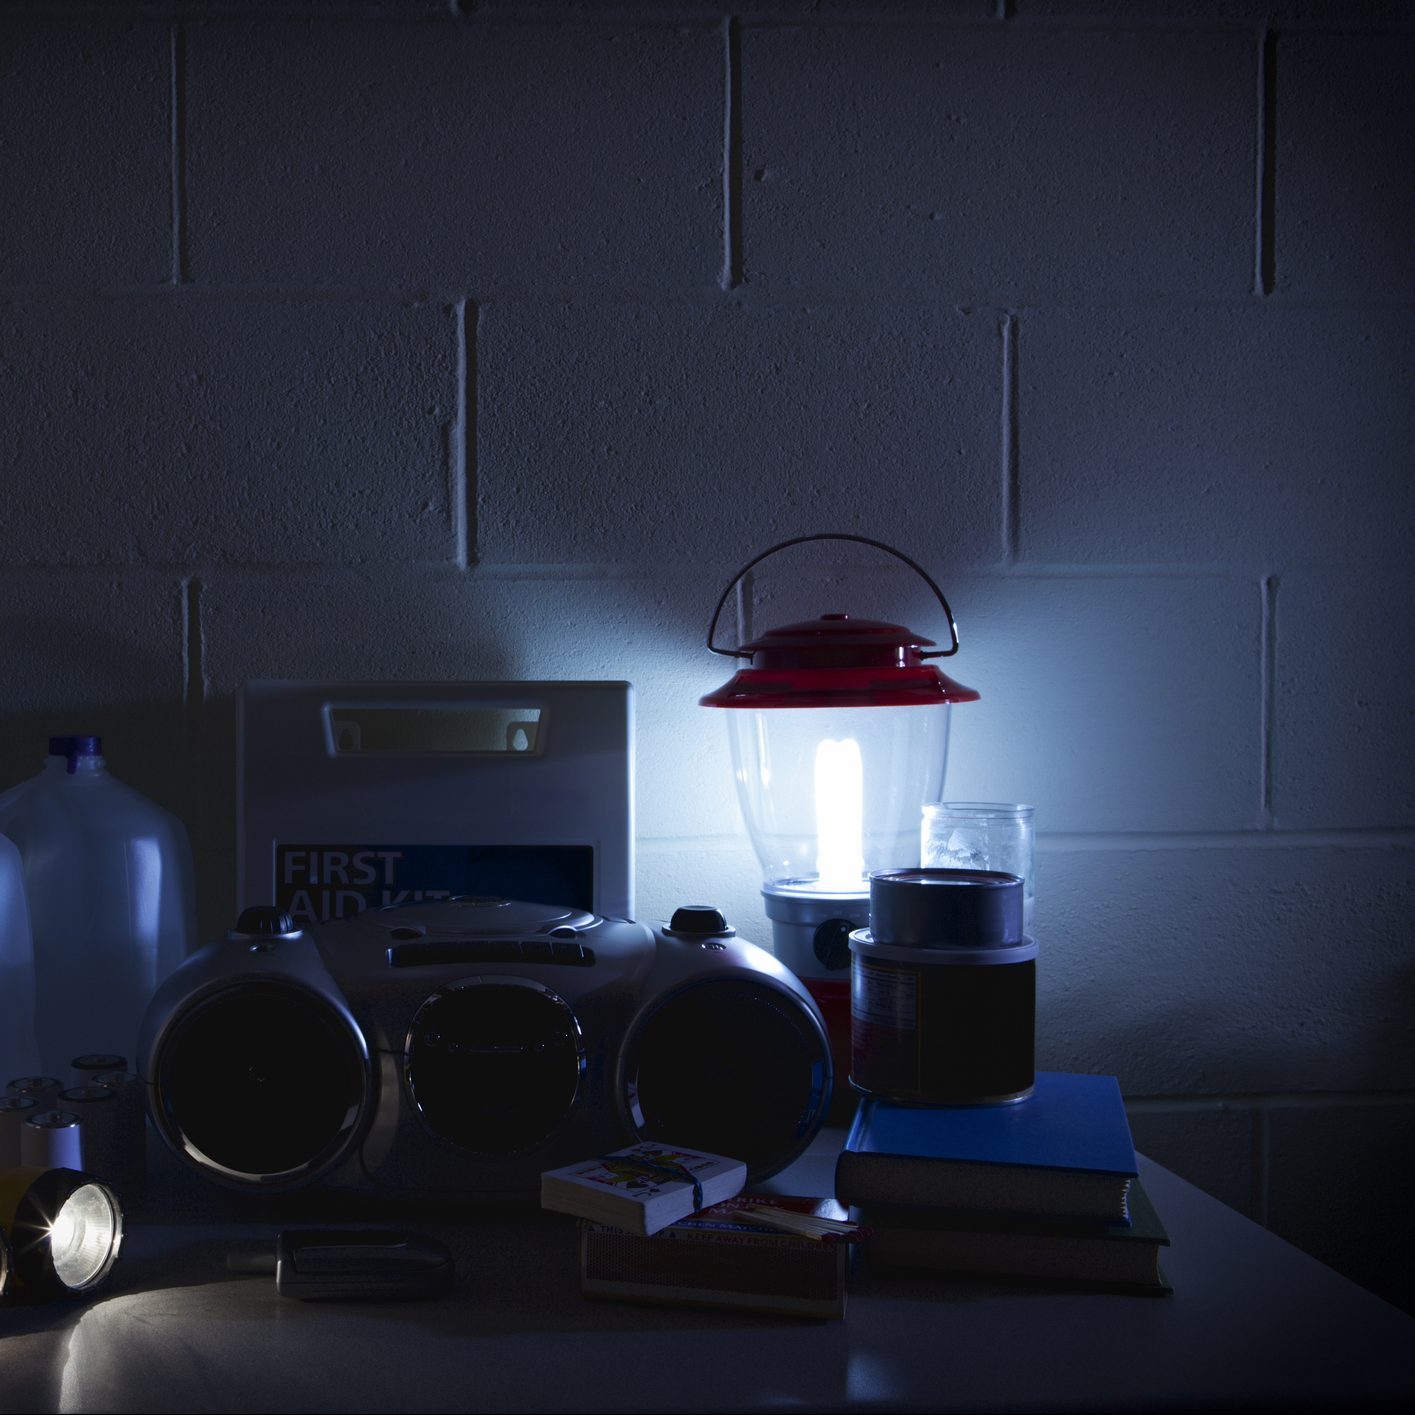 13 Essential Items You Need During A Power Outage - Insureberry Insurance  Agency